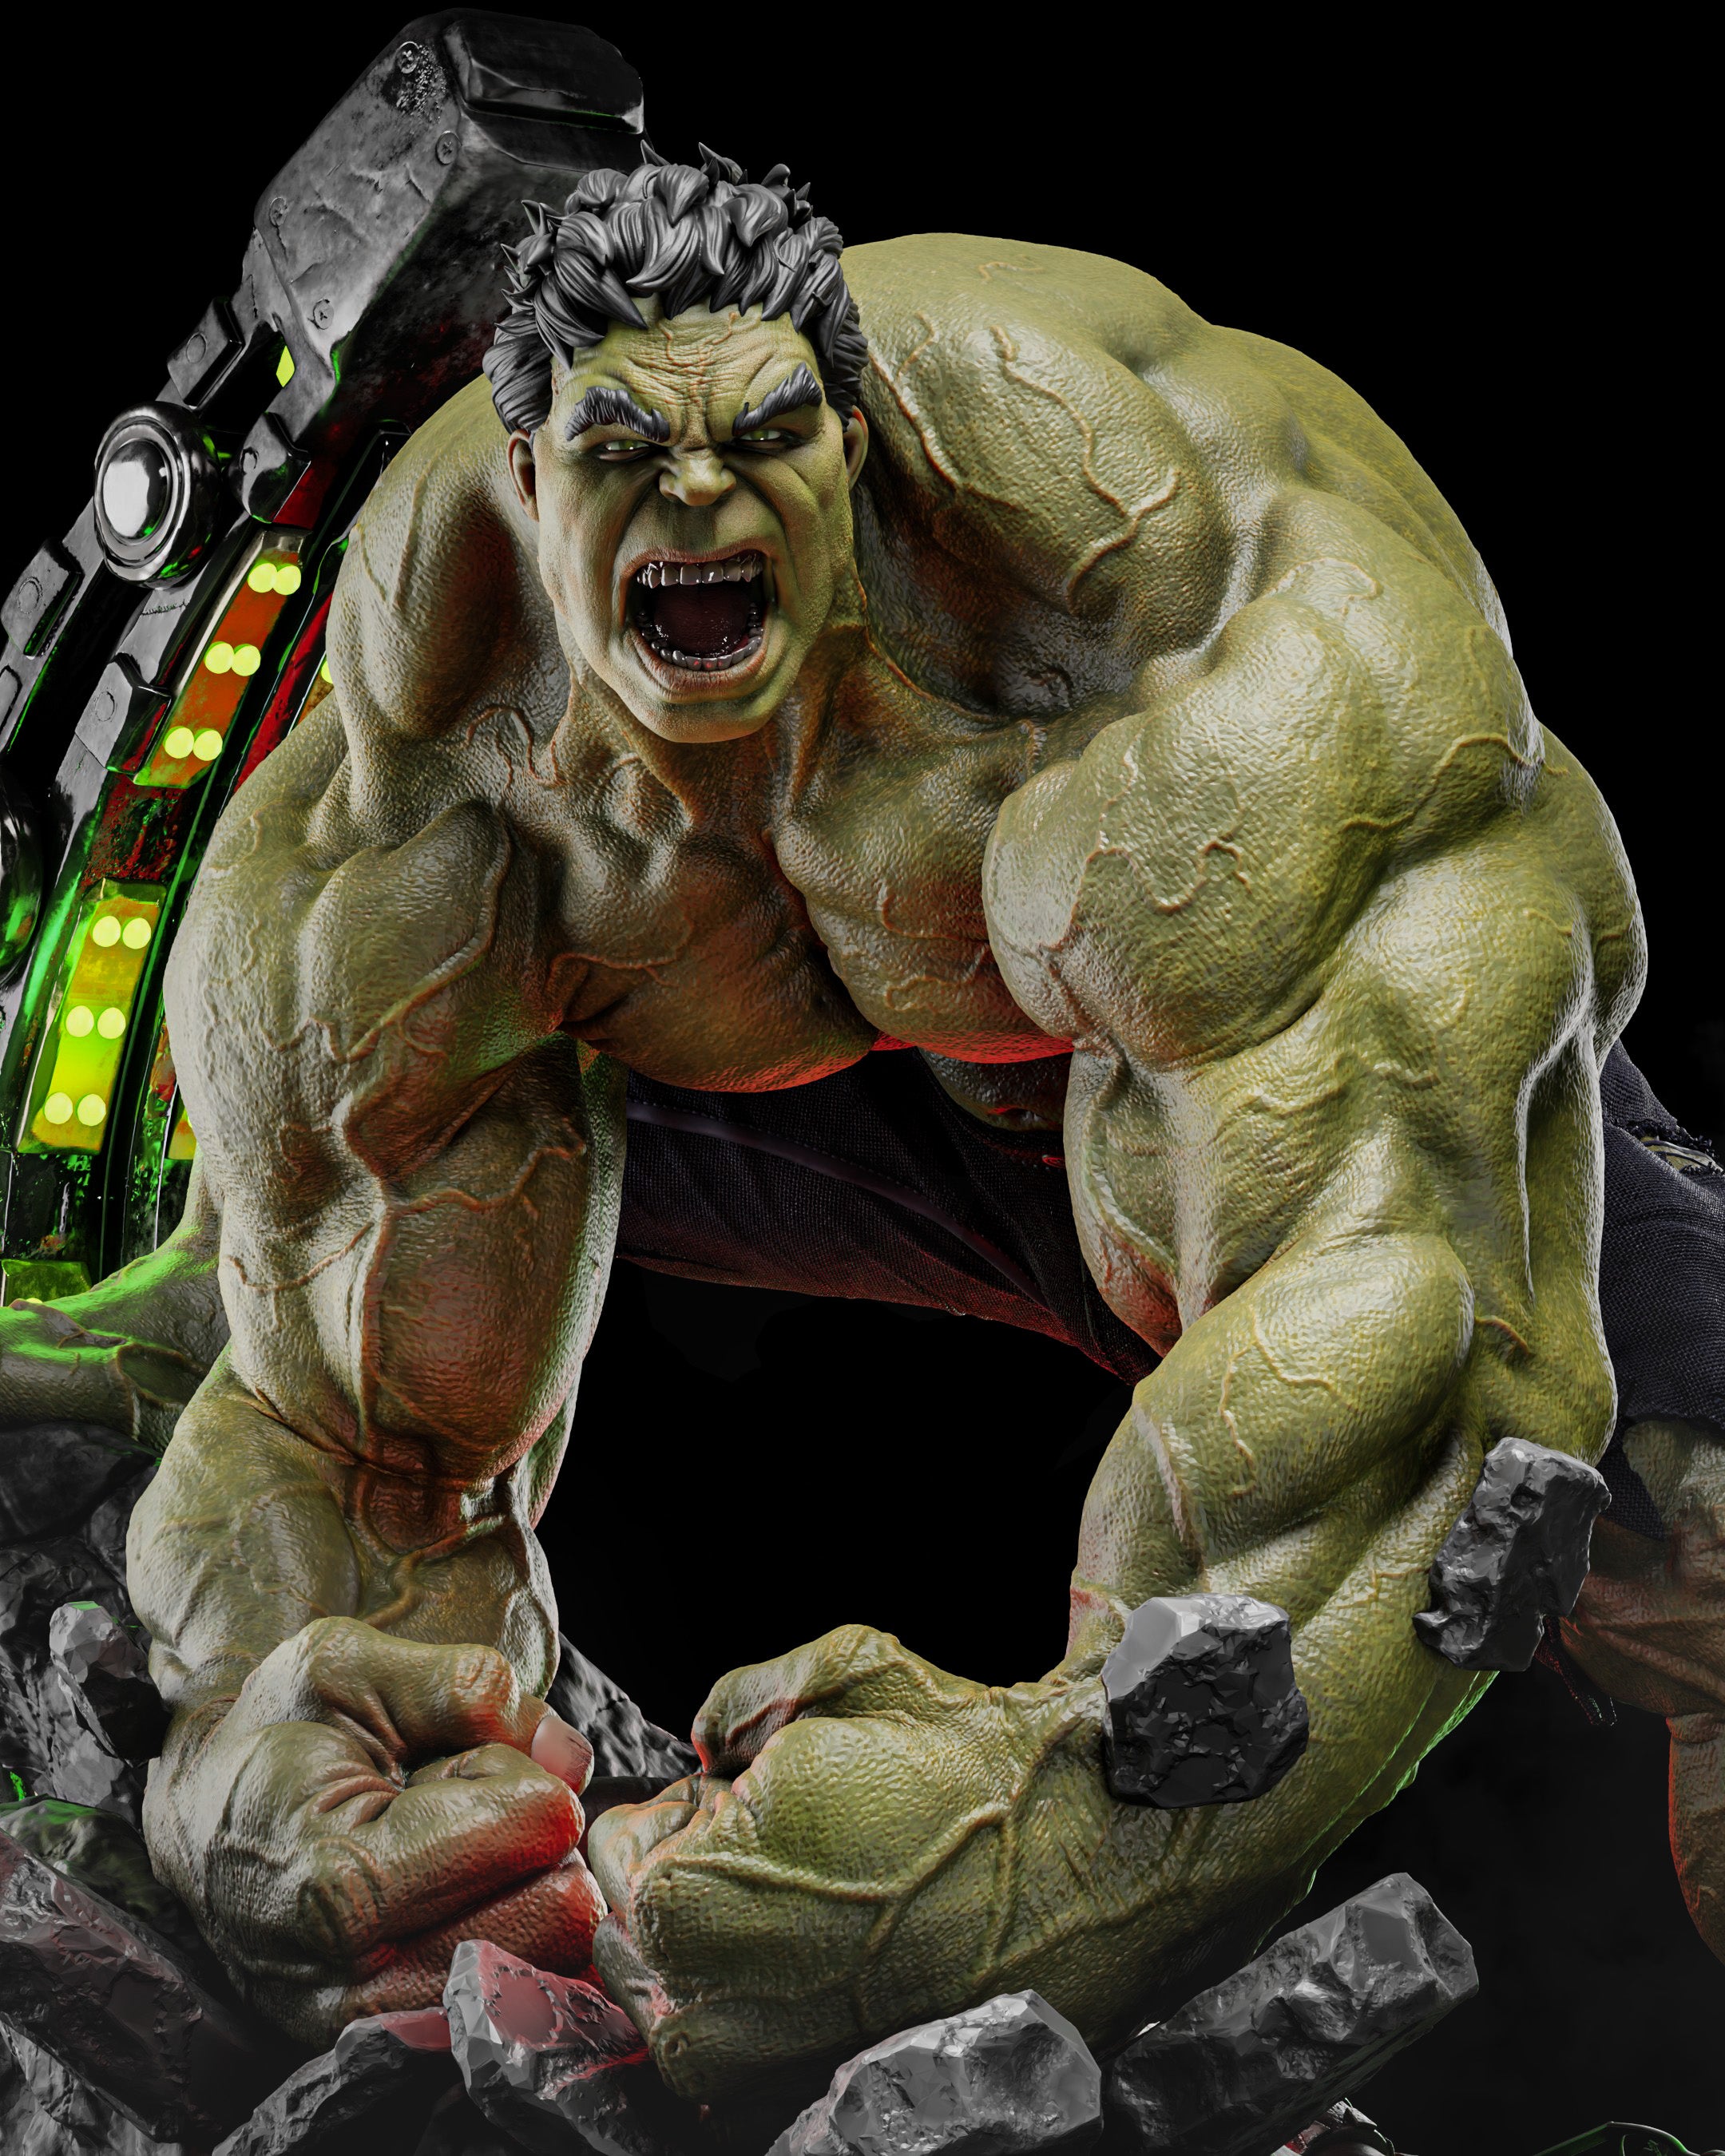 Hulk Collectible Statue by ZeZ Studios - unpainted or painted versions